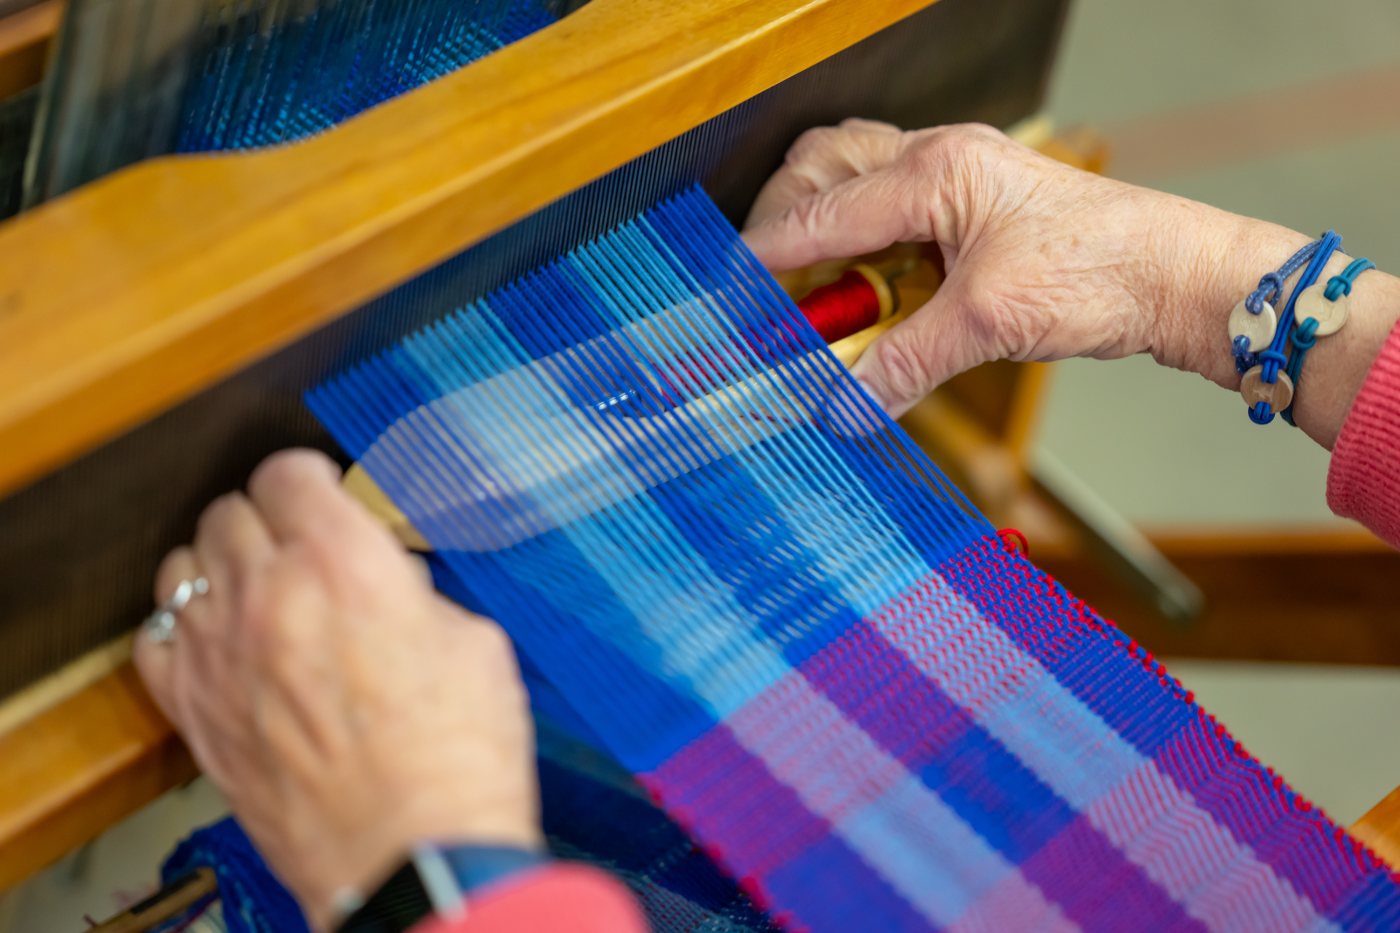 Textile artist weaves on a loom. Photo by Max Franz.